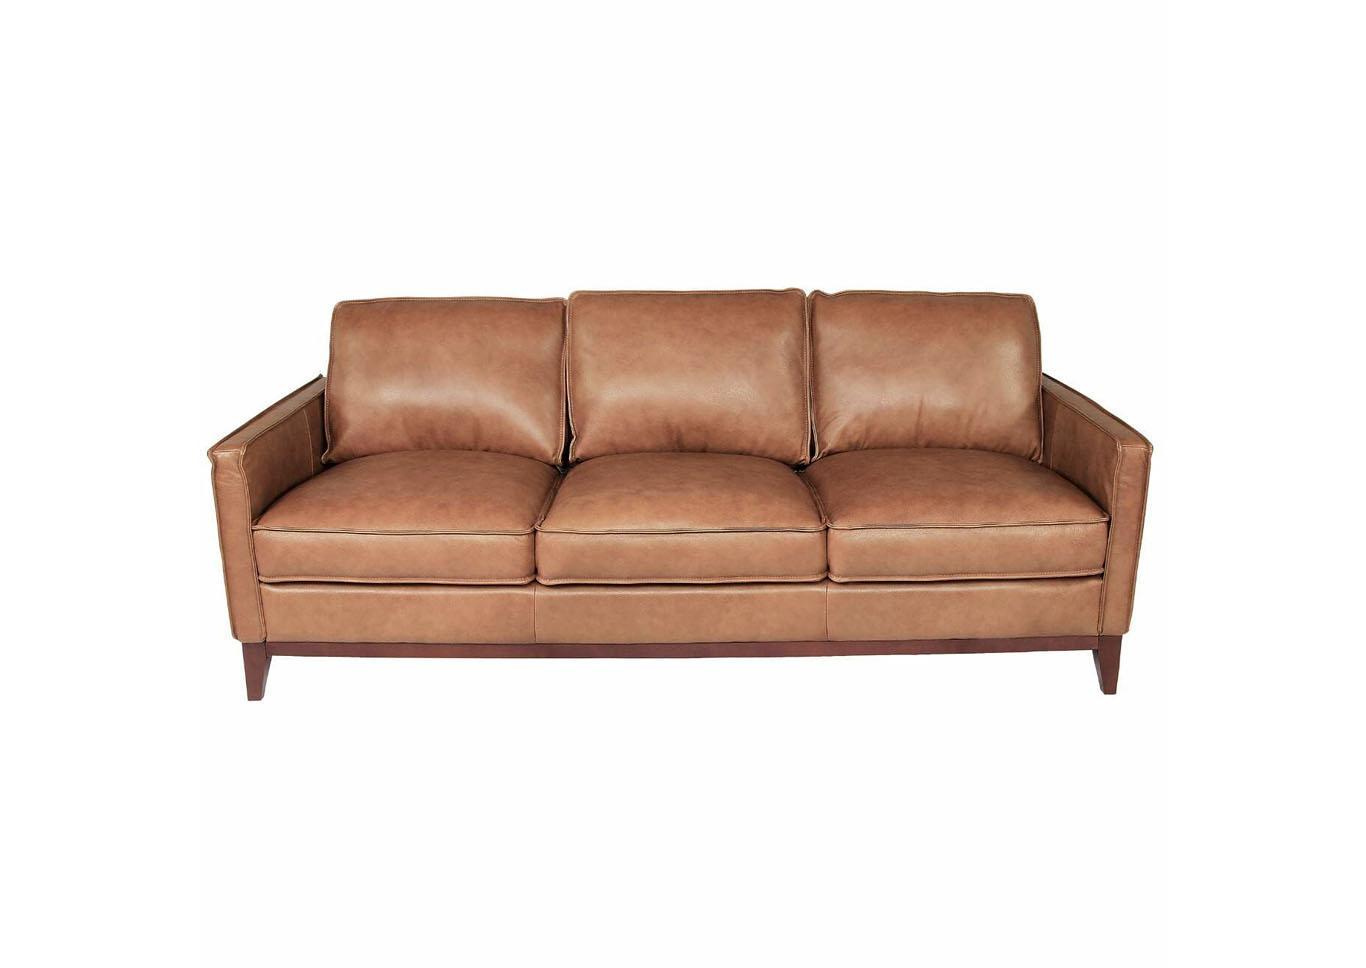 Newport Top Grain Leather Sofa Nader S, Top Grain Leather Sectional